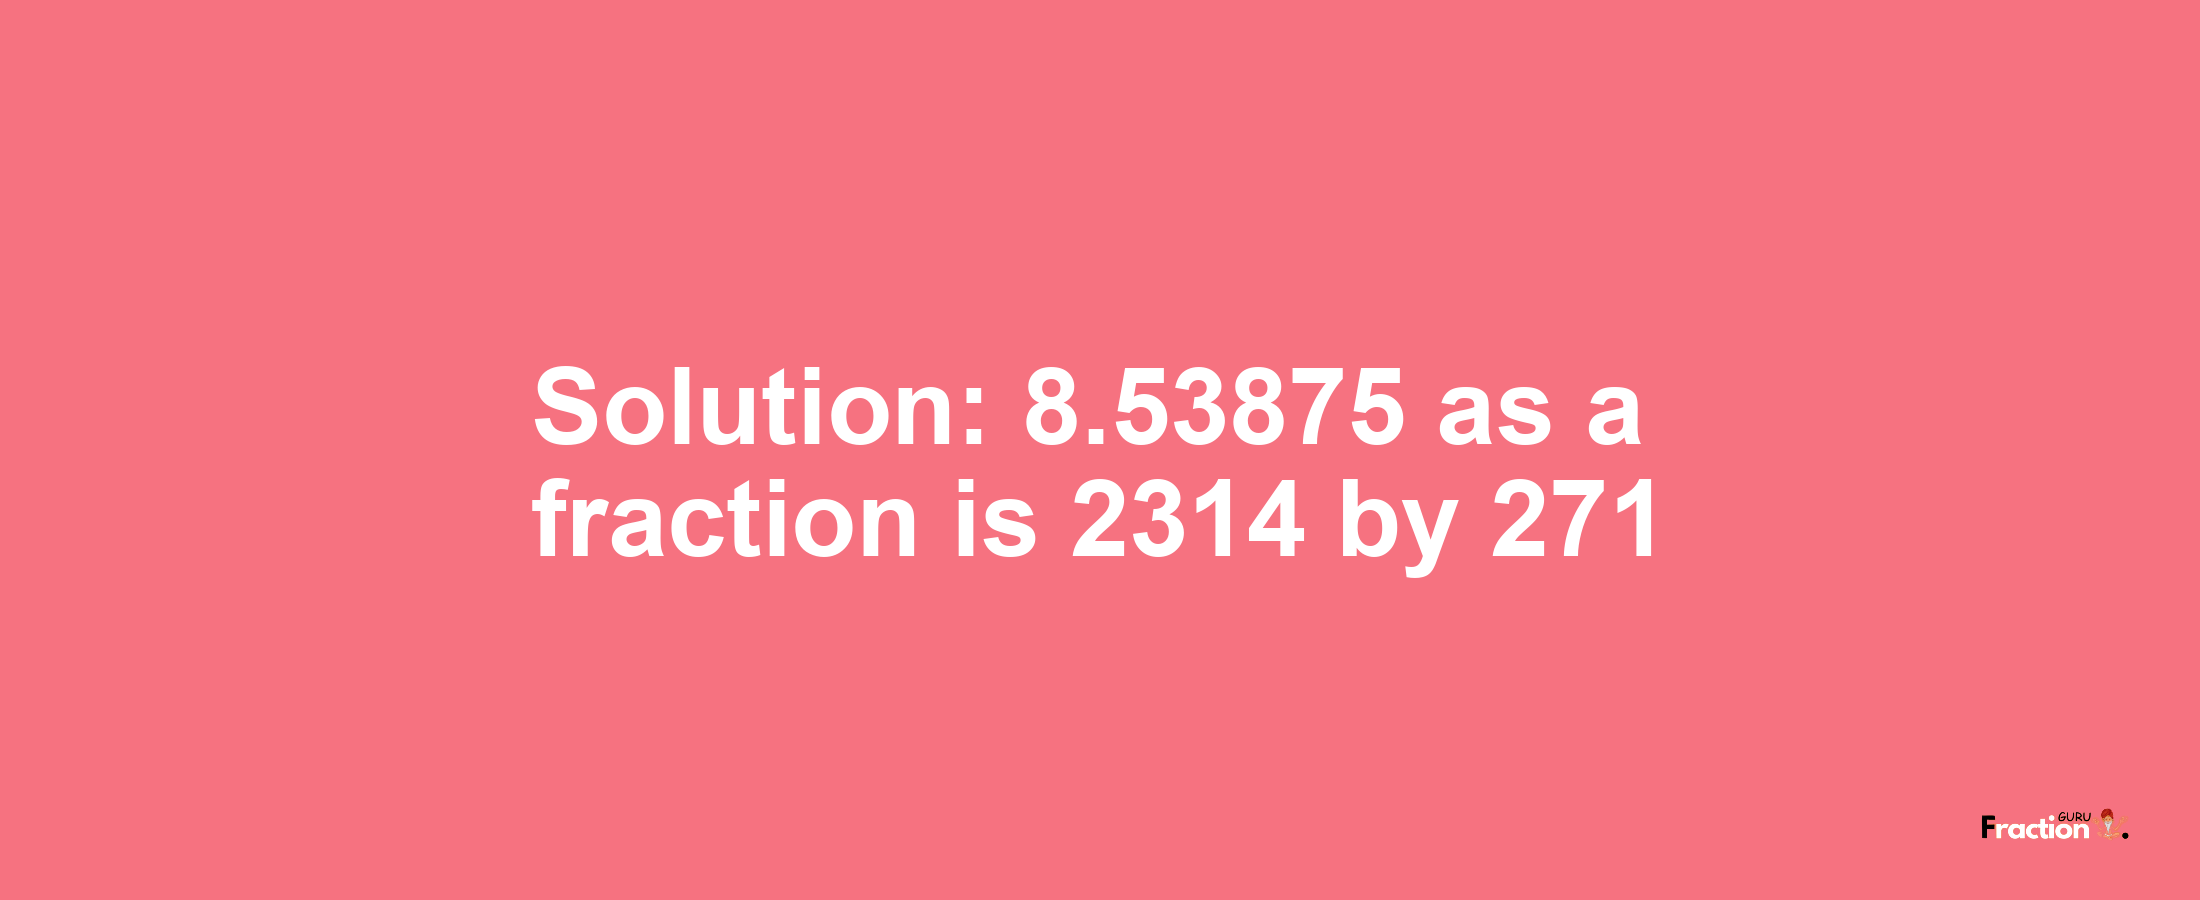 Solution:8.53875 as a fraction is 2314/271